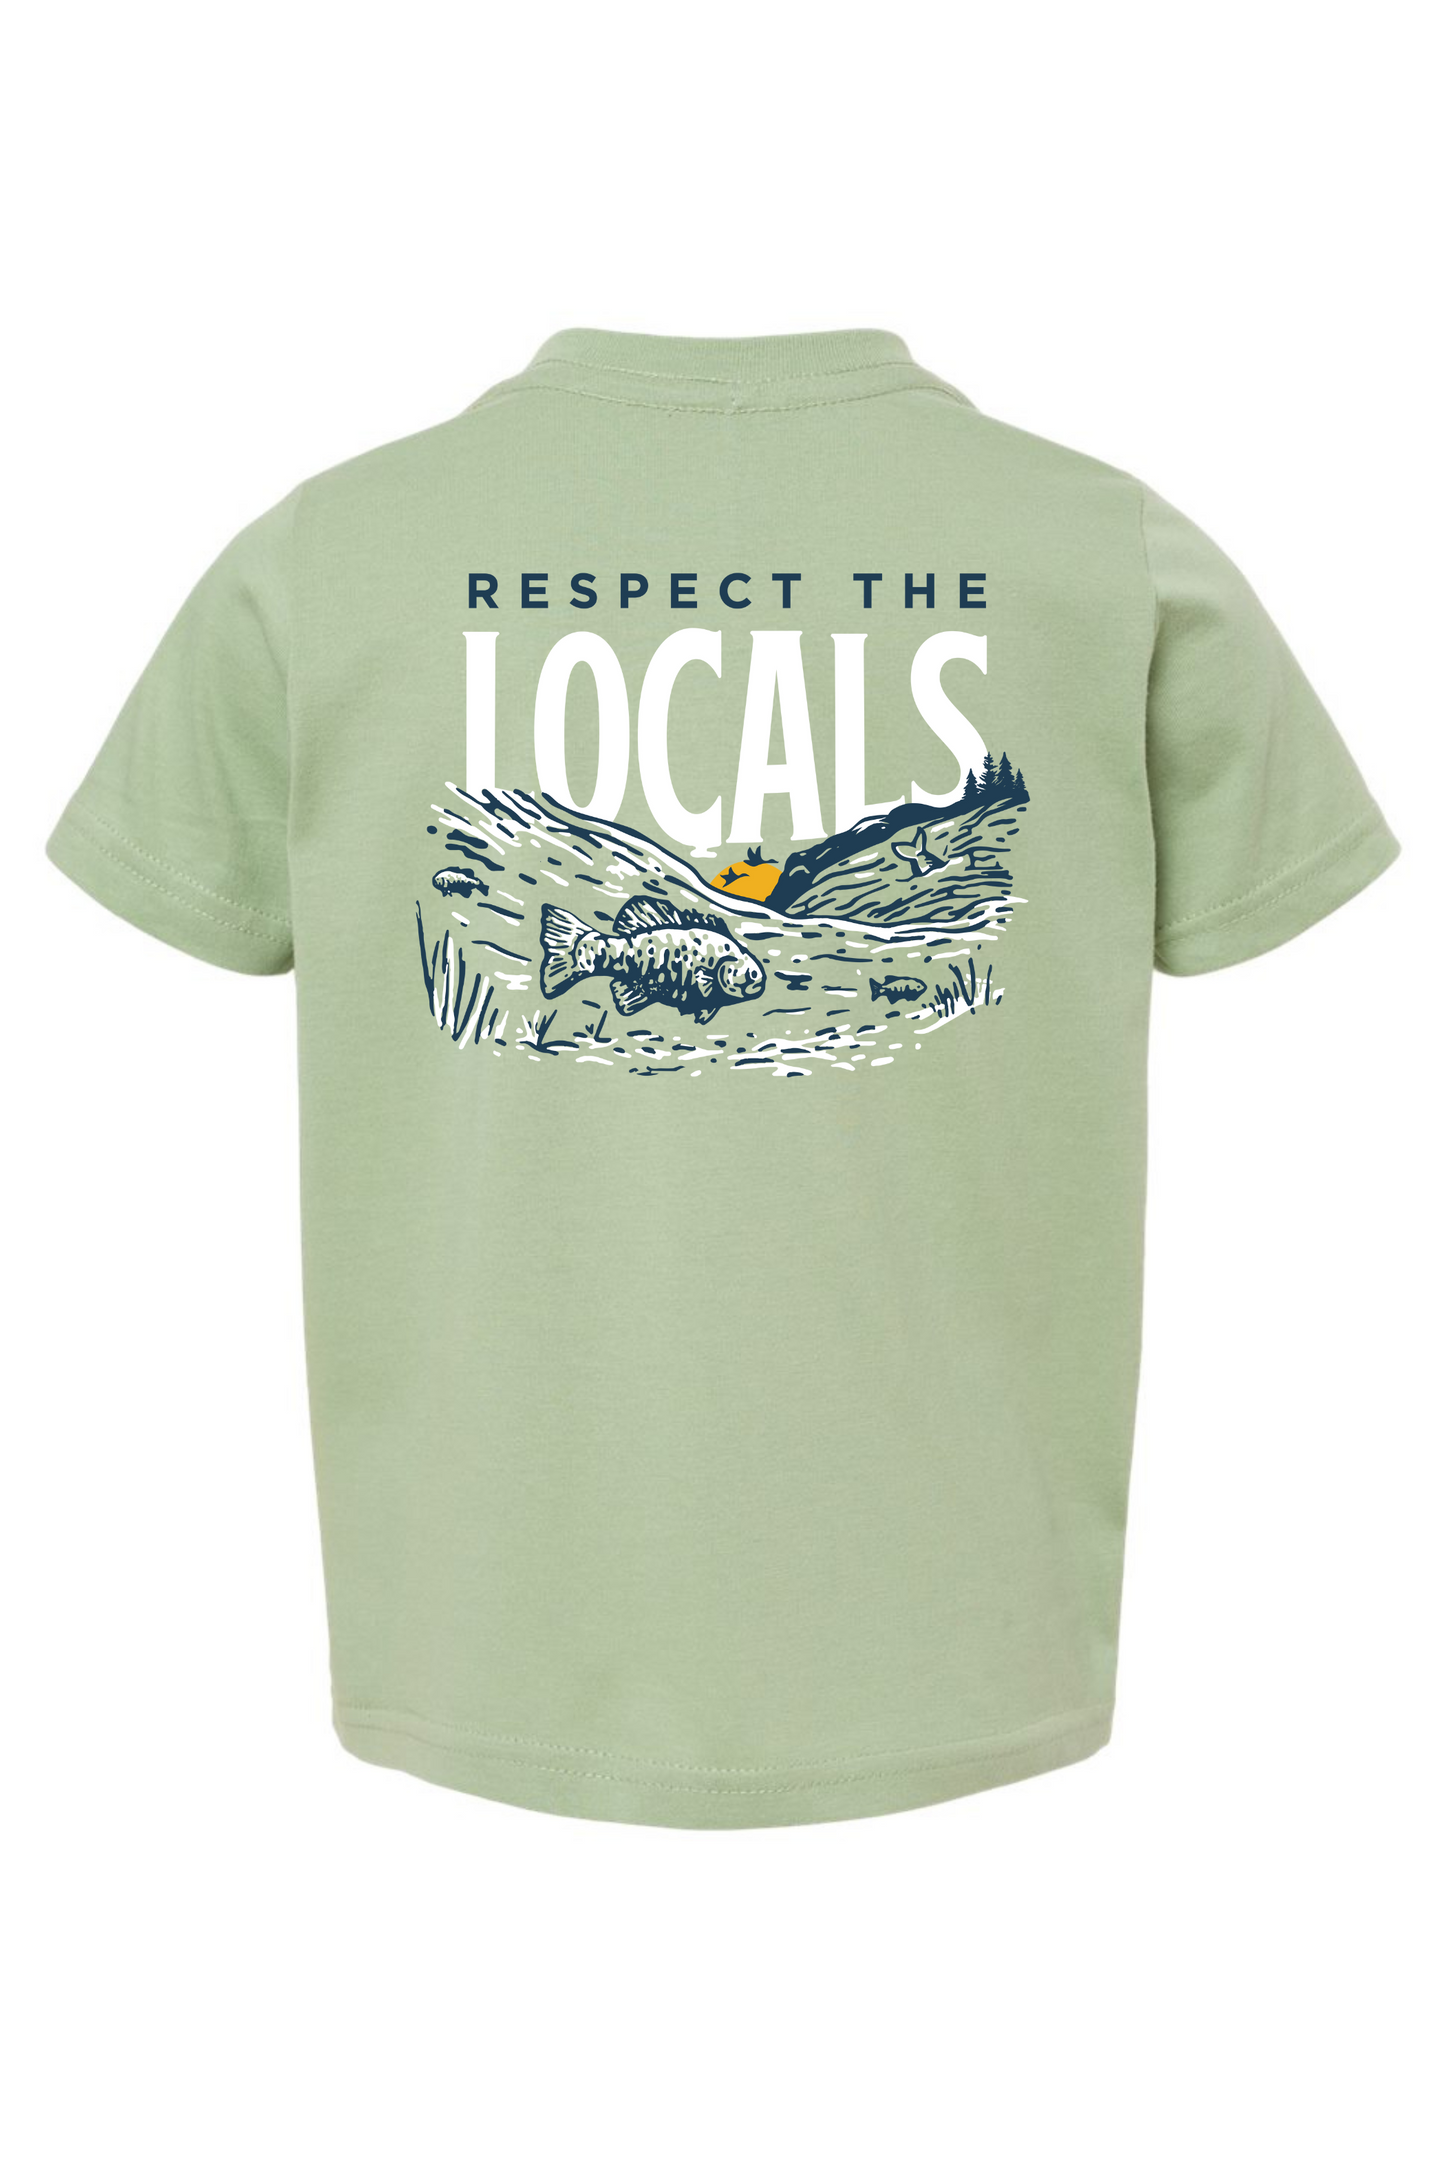 Respect the Locals | Boy's Tee-Sister Shirts-Sister Shirts, Cute & Custom Tees for Mama & Littles in Trussville, Alabama.